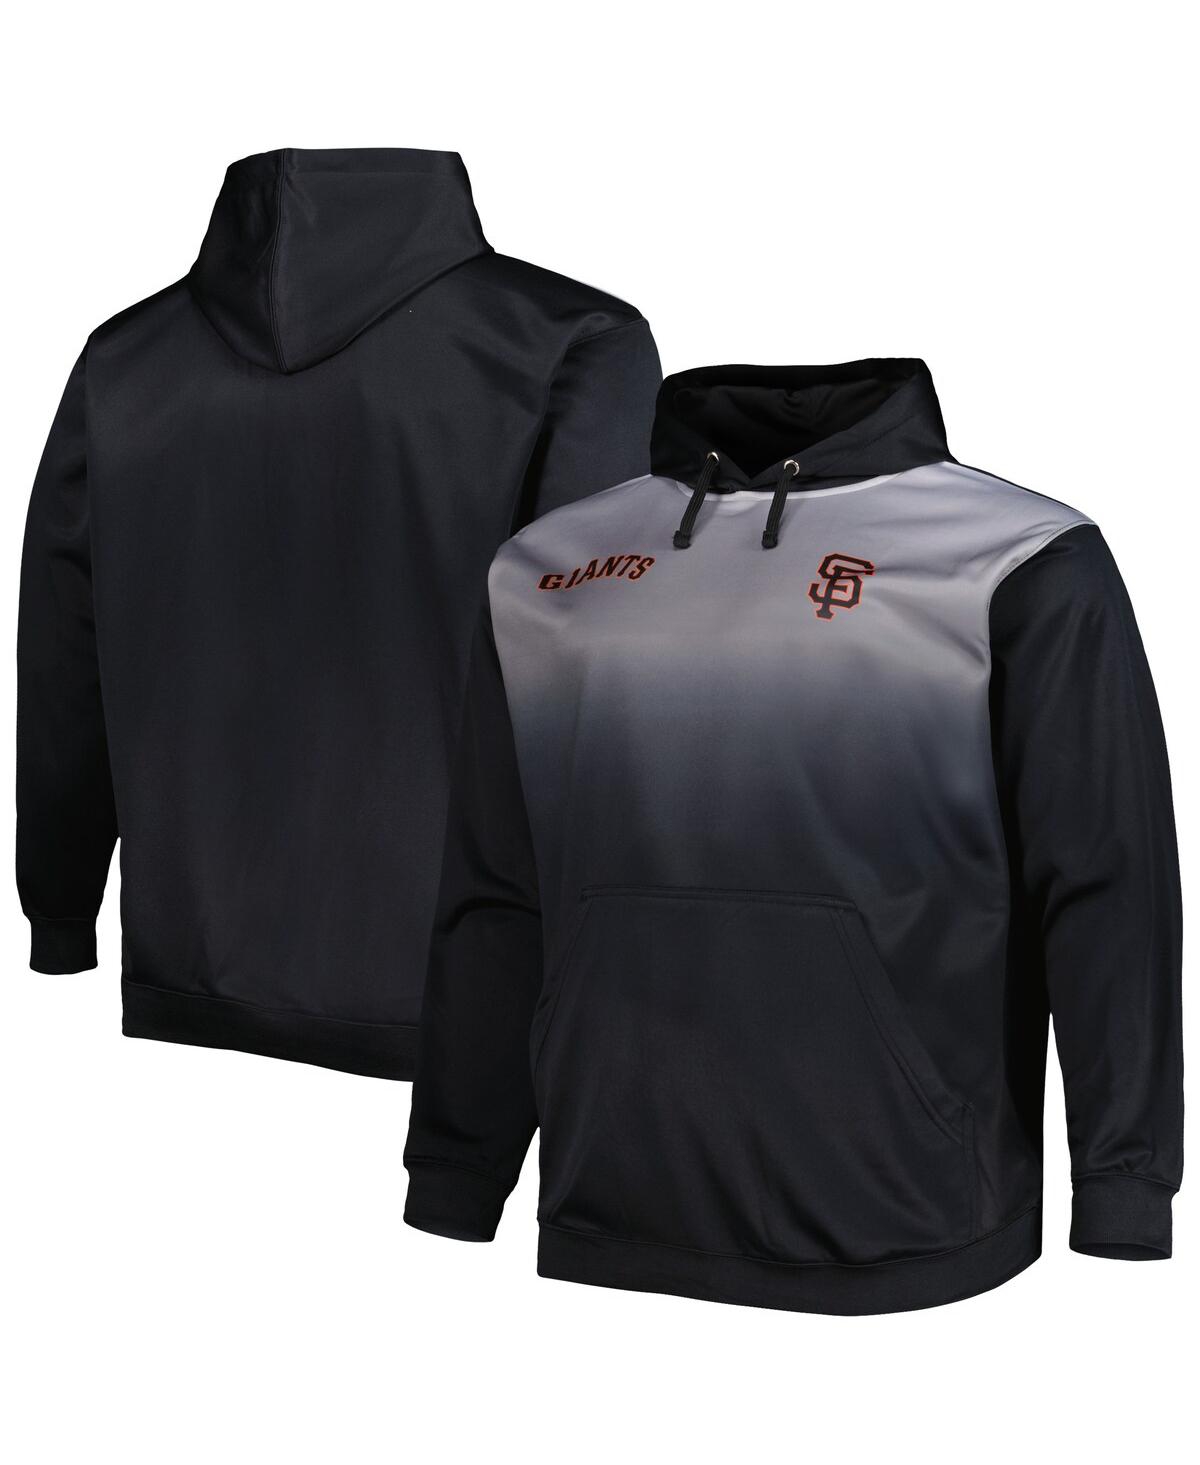 Men's Big and Tall Black San Francisco Giants Fade Sublimated Fleece Pullover Hoodie - Black